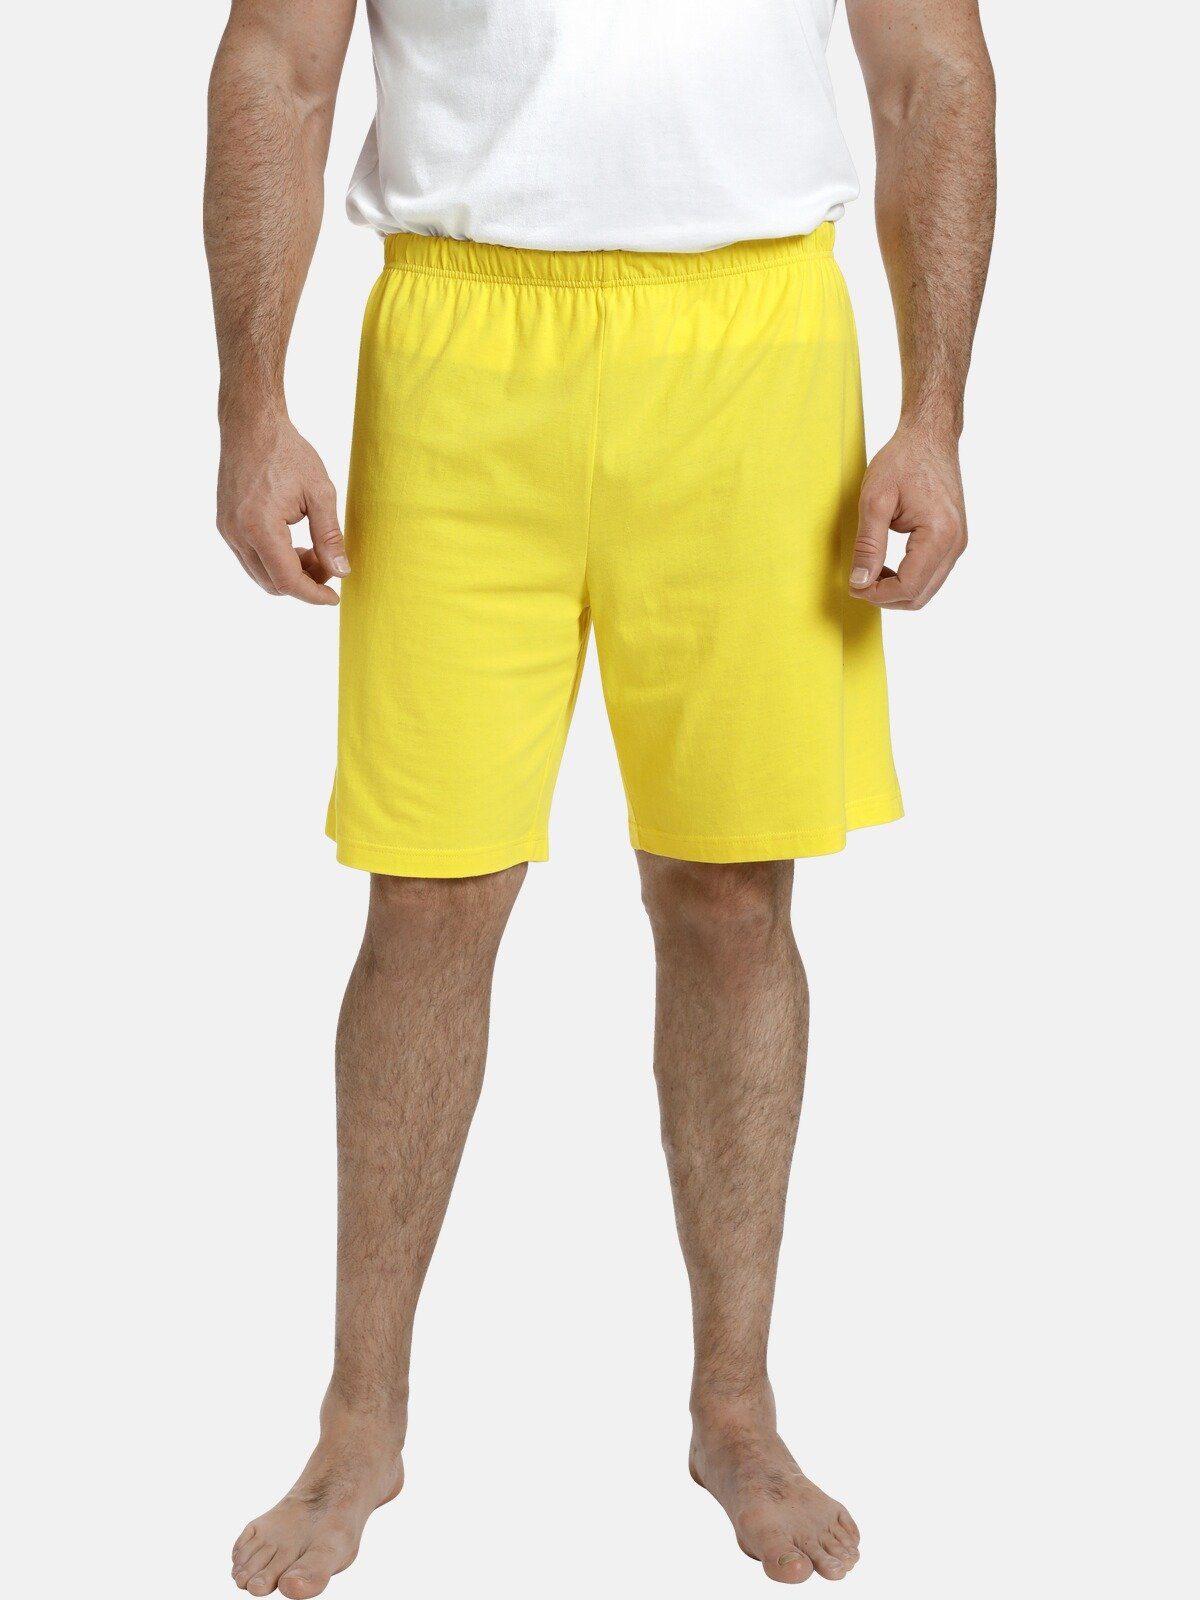 leichte Relaxshorts gelb Colby MYCROFT LORD bequeme Charles Schlafhose